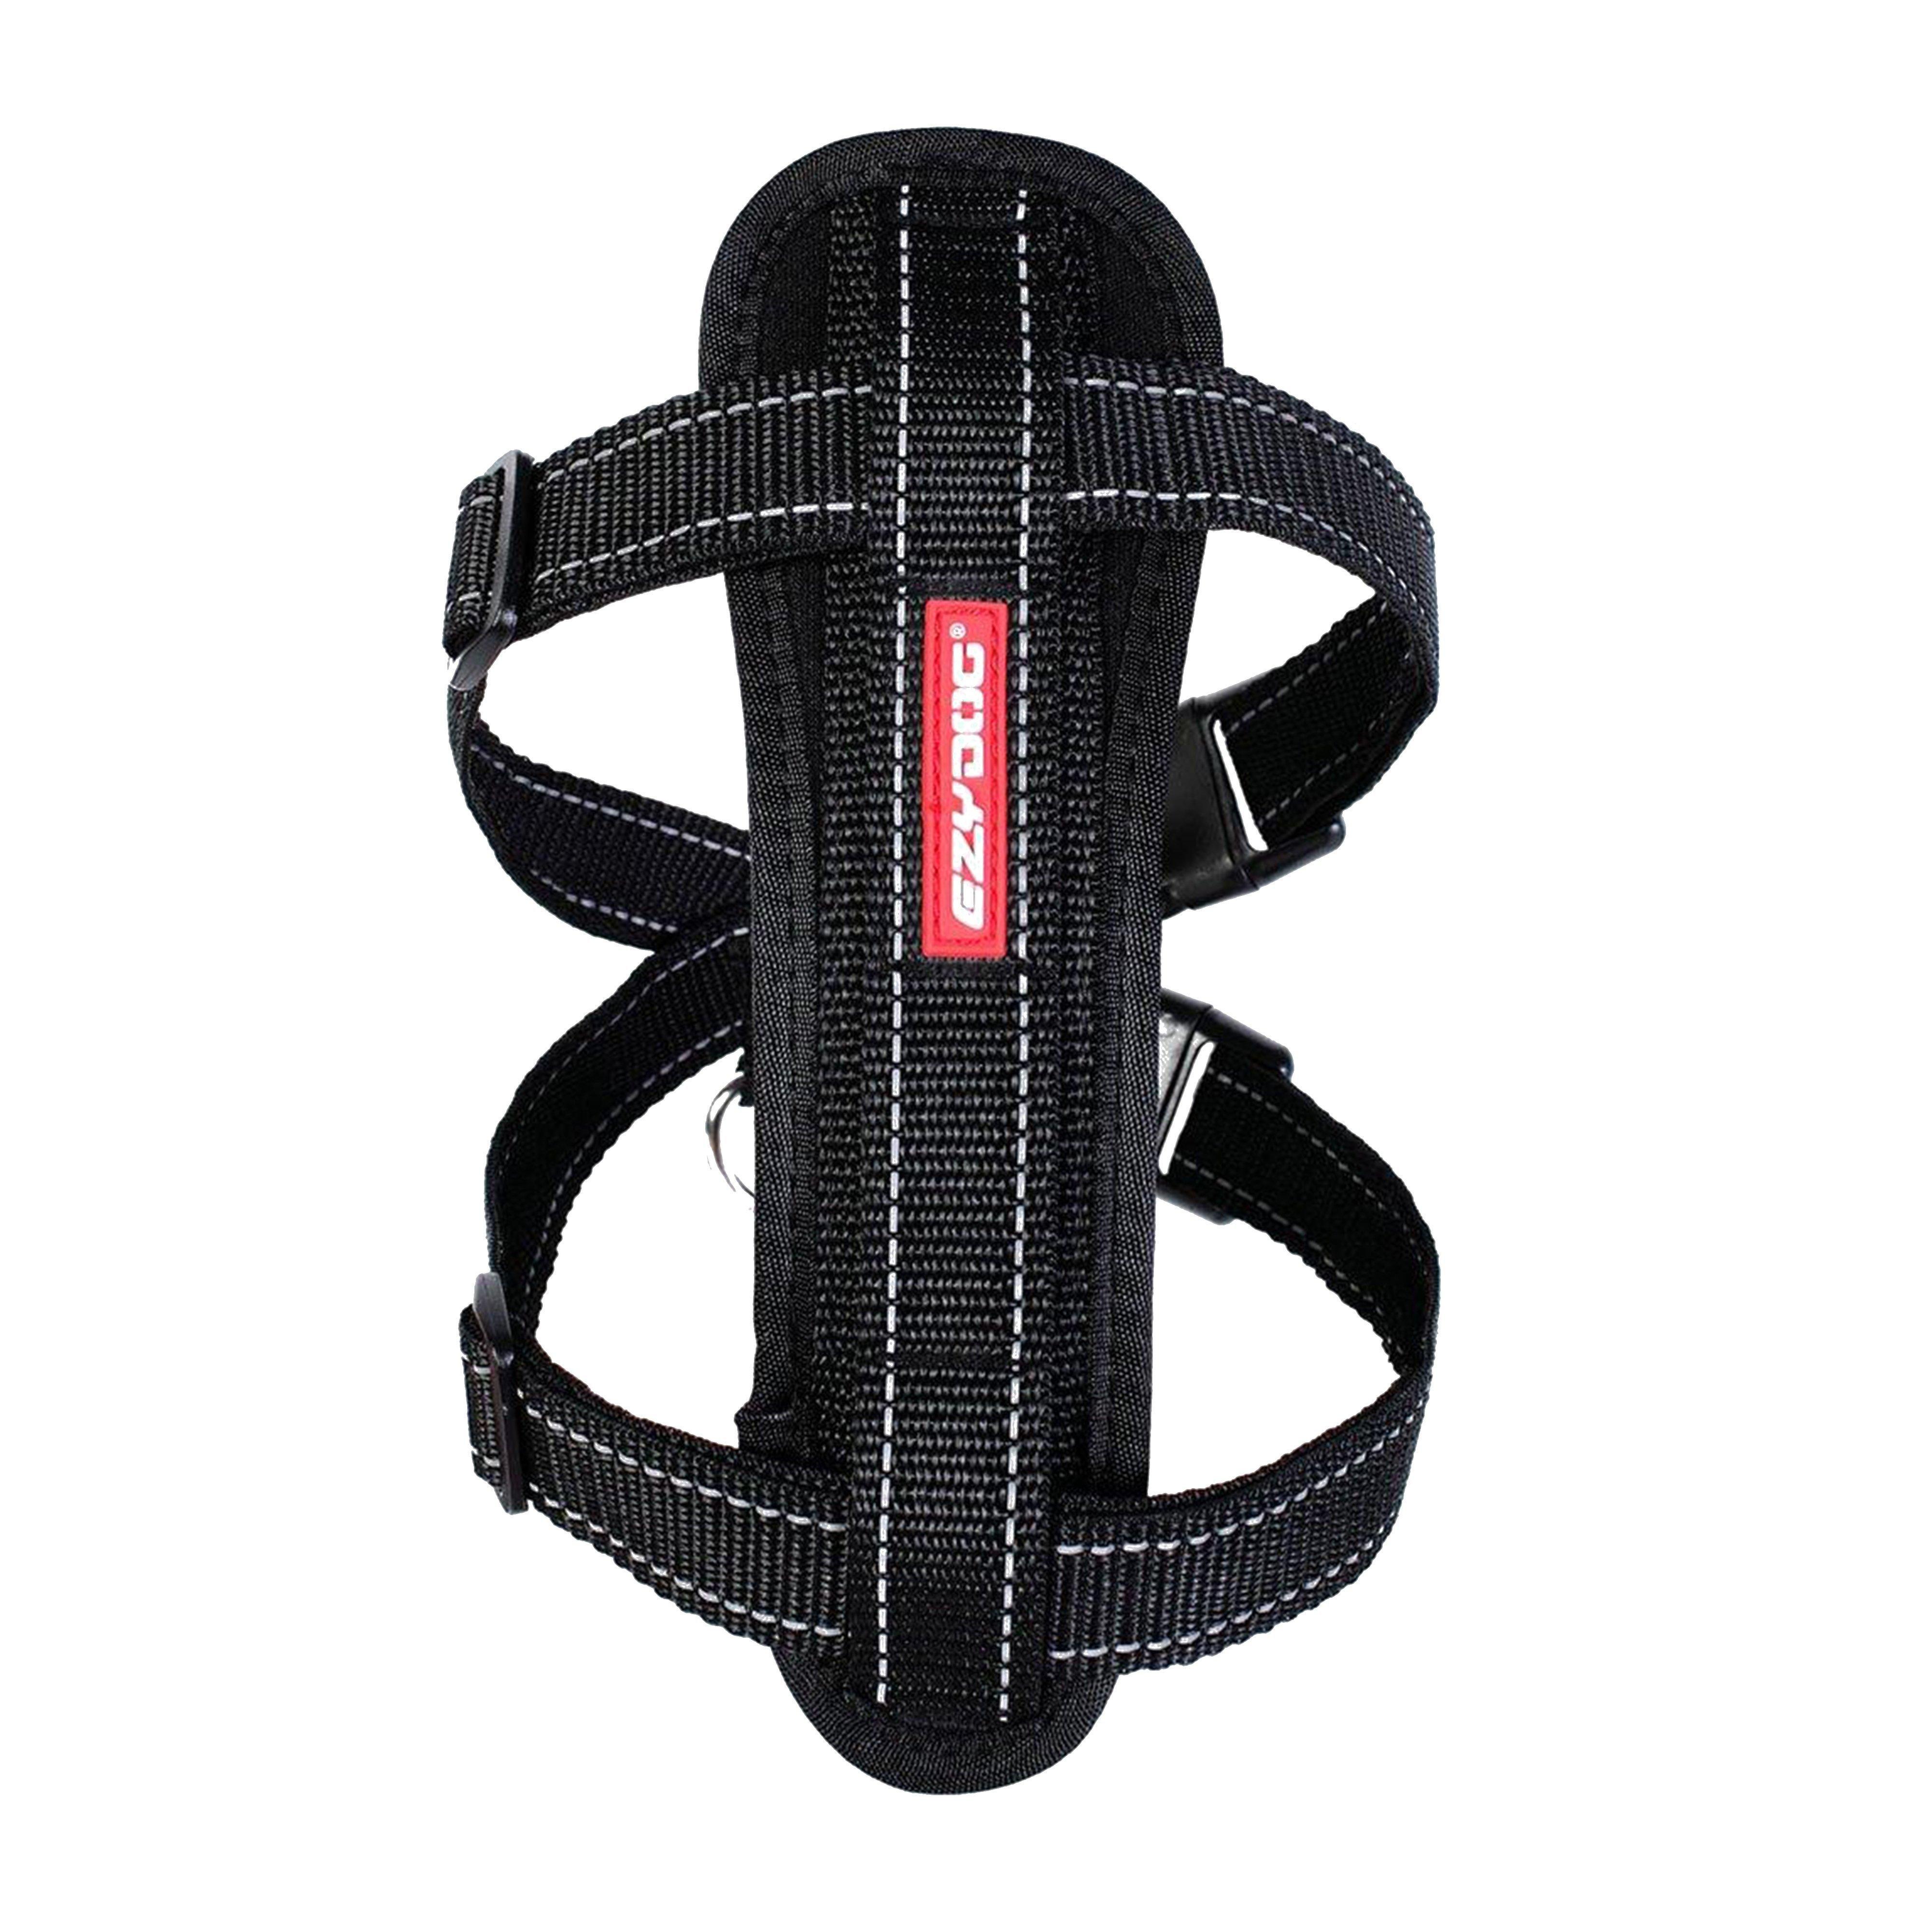 Chest Plate Harness Black Small